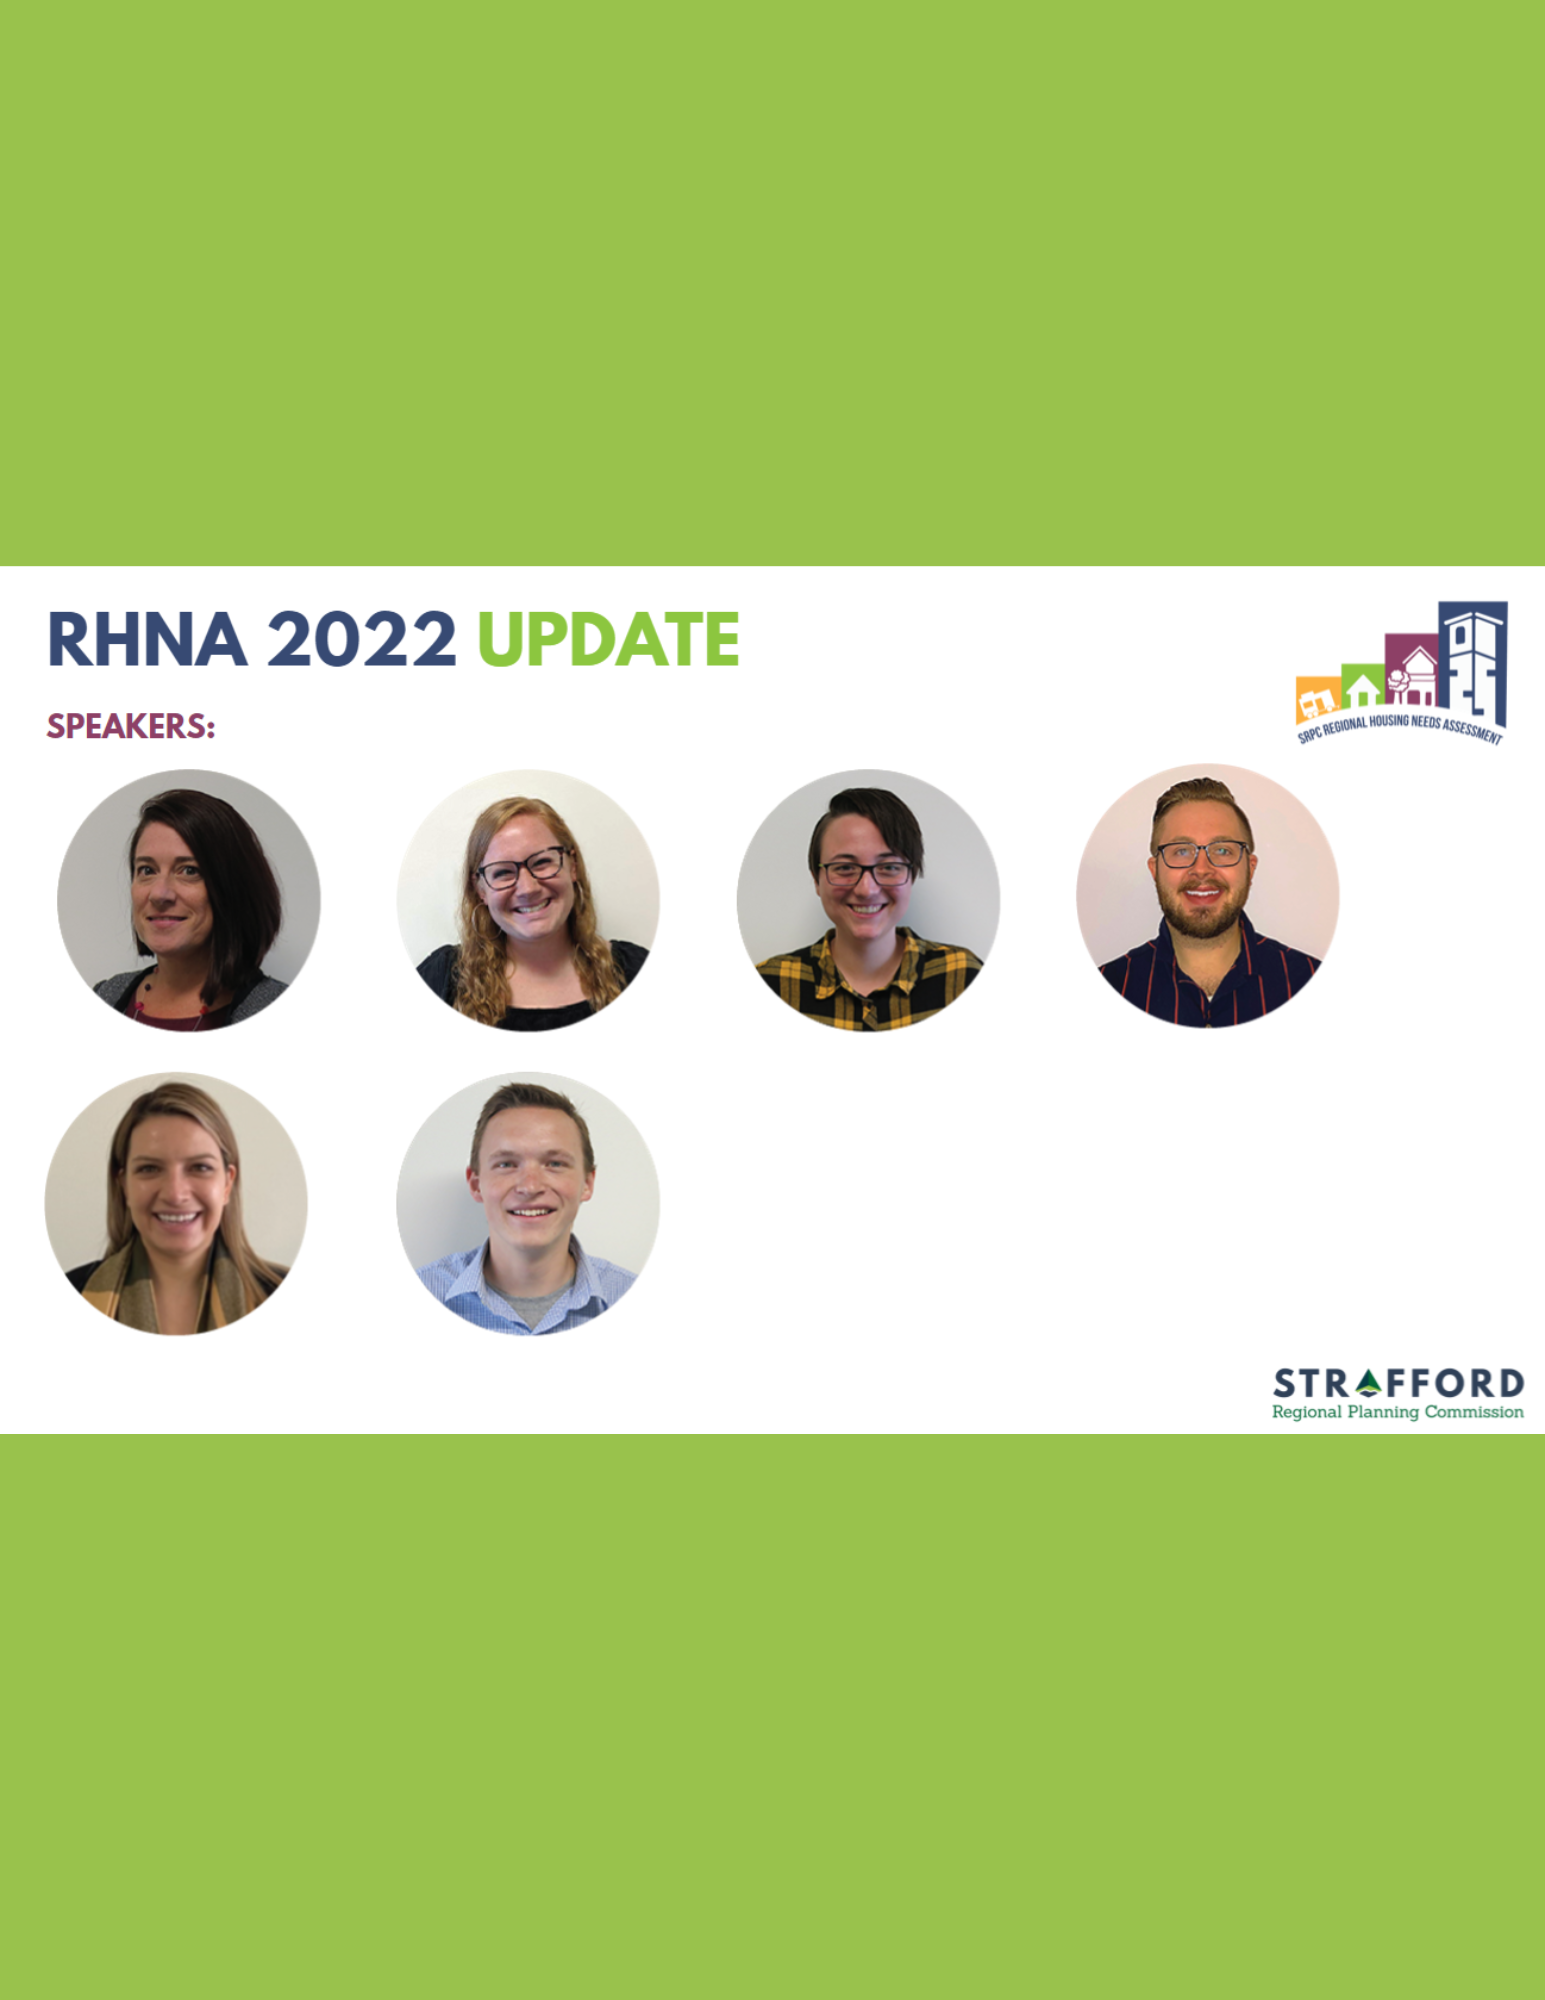 Cover slide from the December 2022 Commissioner Meeting RHNA presentation featuring six staff photos